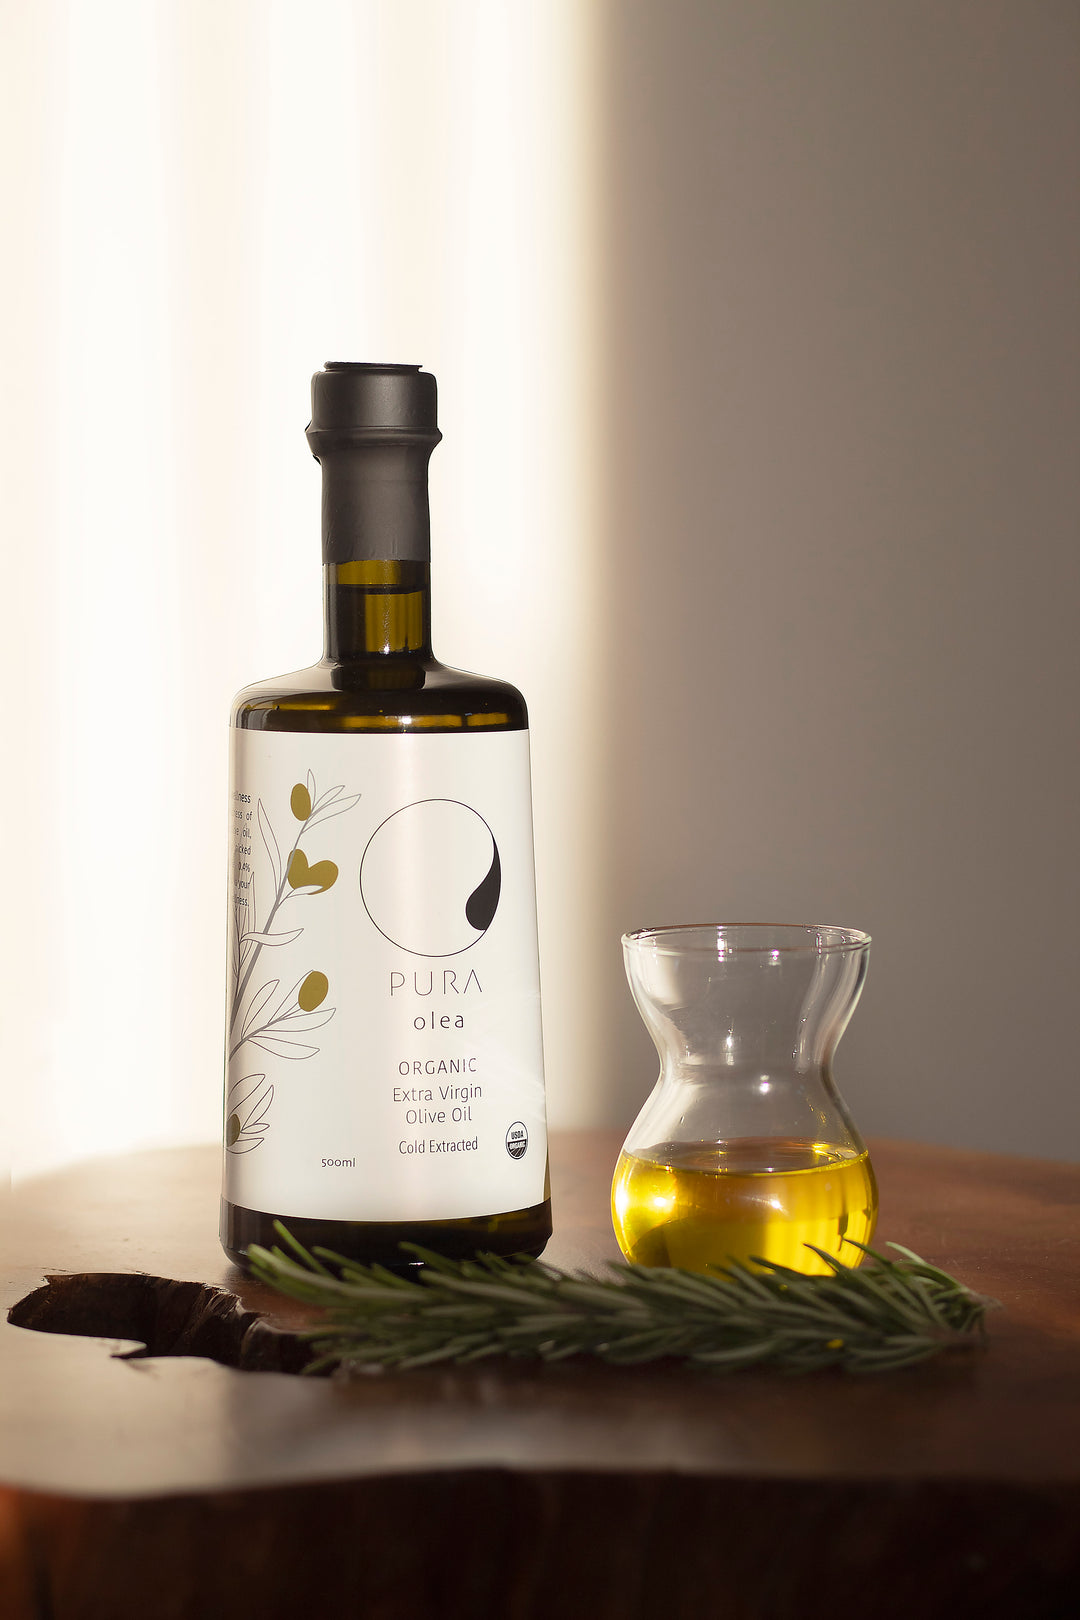 Elevate Your Recipes with PURA olea Premium Organic Olive Oil: The Perfect Ingredient for Any Dish